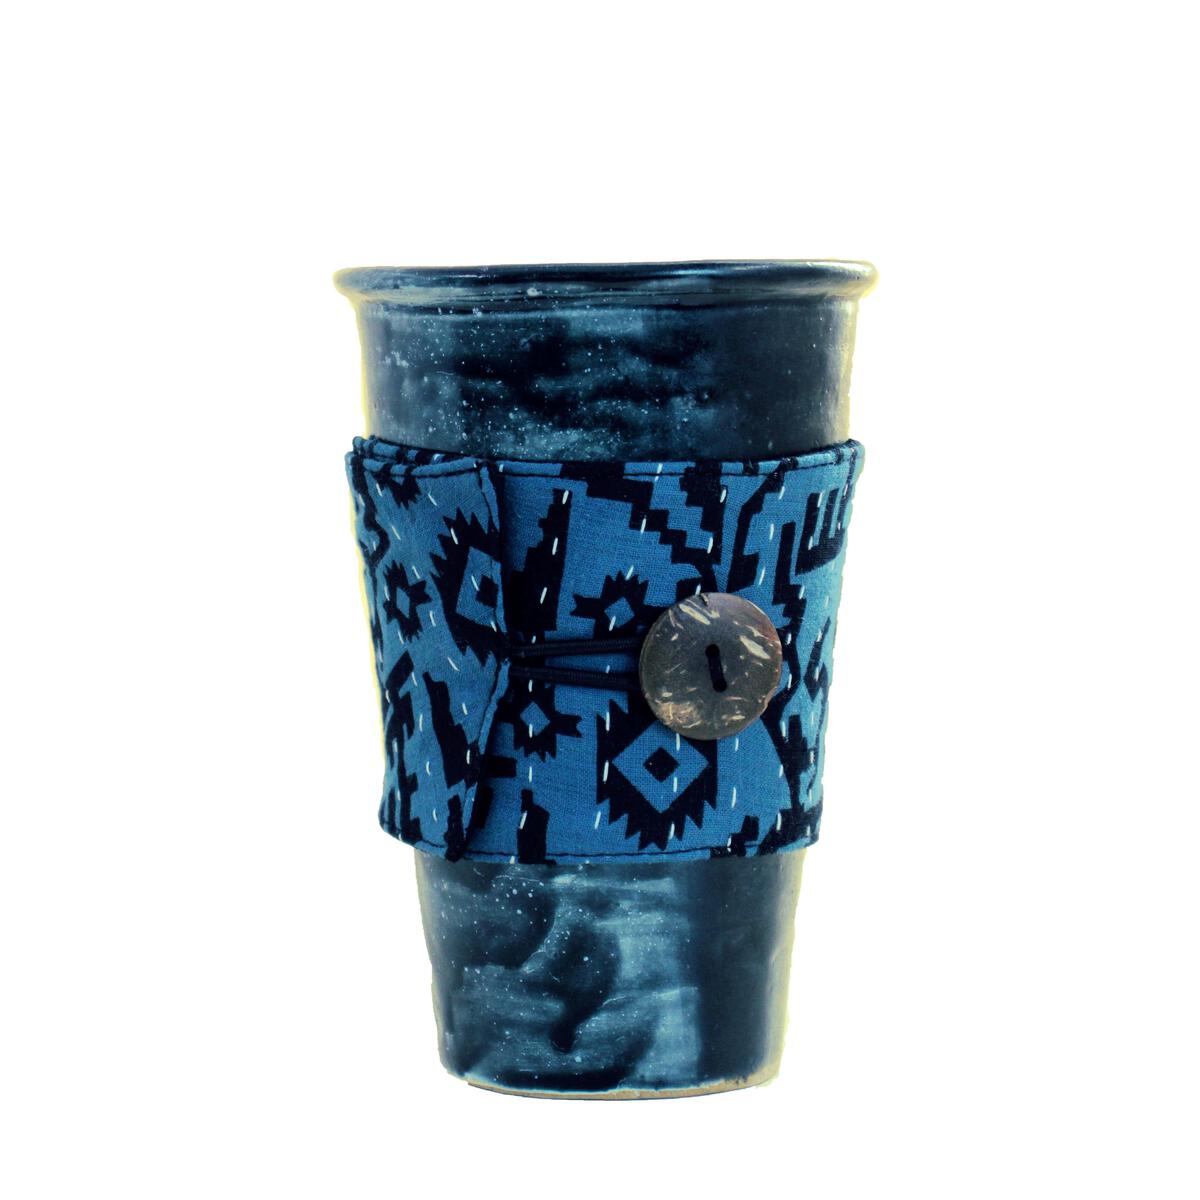 https://www.bashaboutique.com/wp-content/uploads/2023/01/Kantha-Reusable-Coffee-Cup-Sleeve-2.jpg